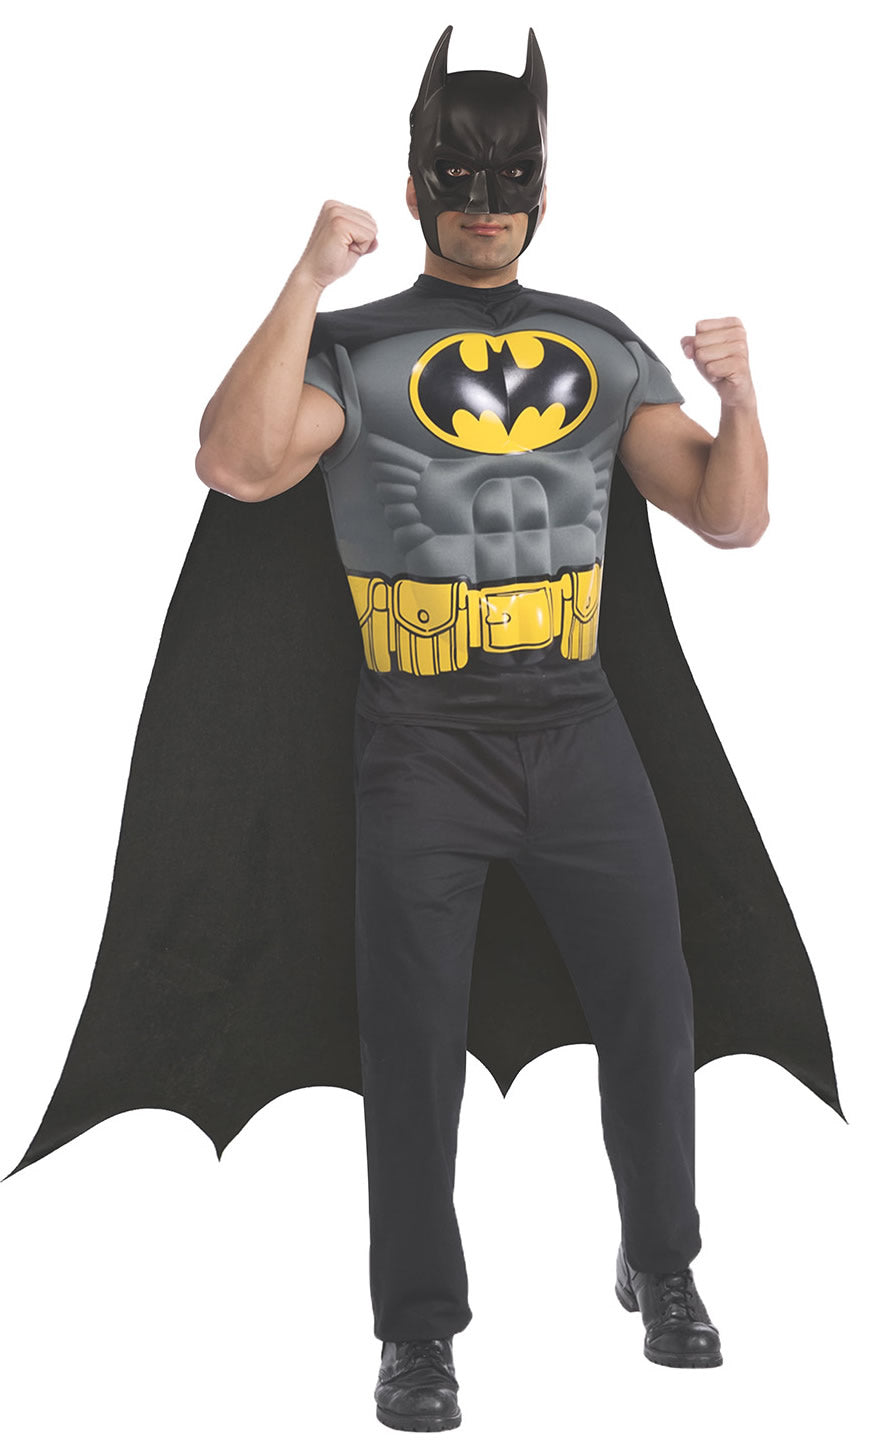 Batman muscle chest shirt with cape and mask